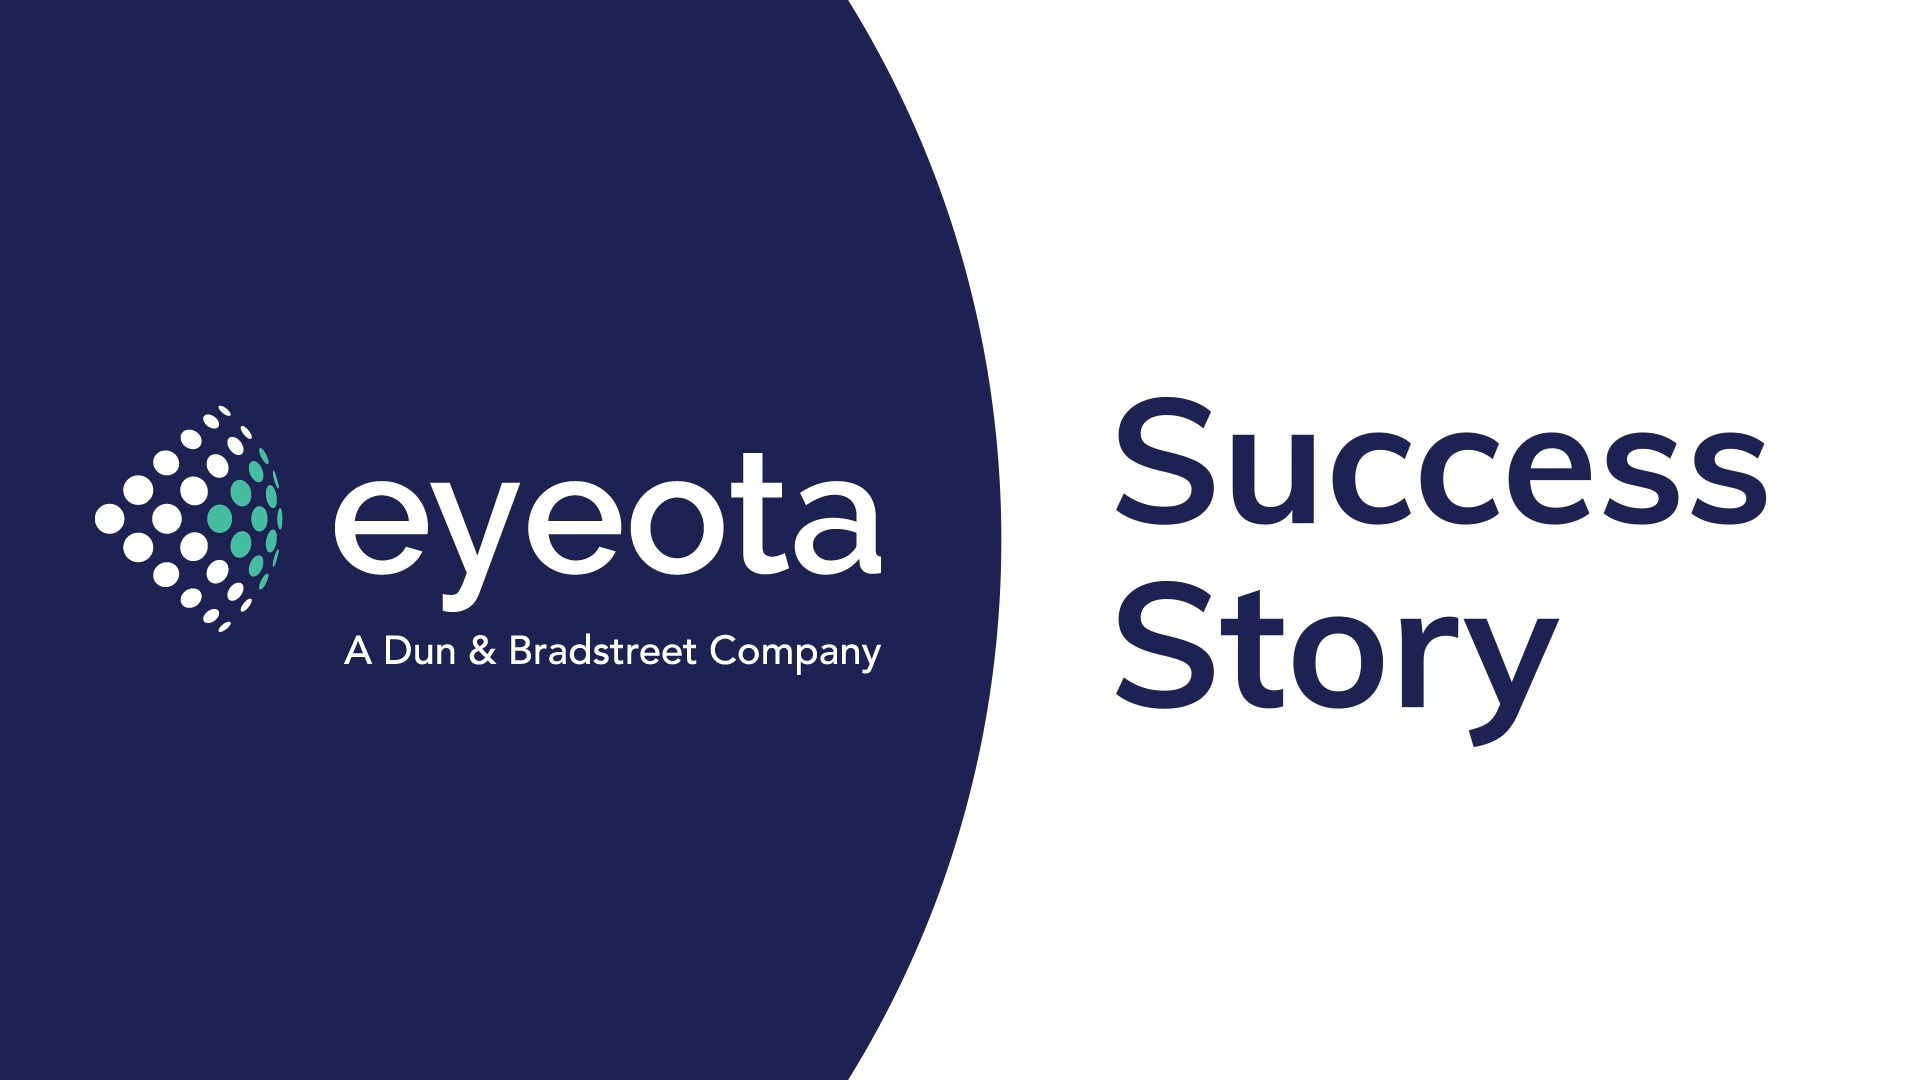 an illustrated image featuring a large blue circle with the Eyeota logo and text that says "Success Story"